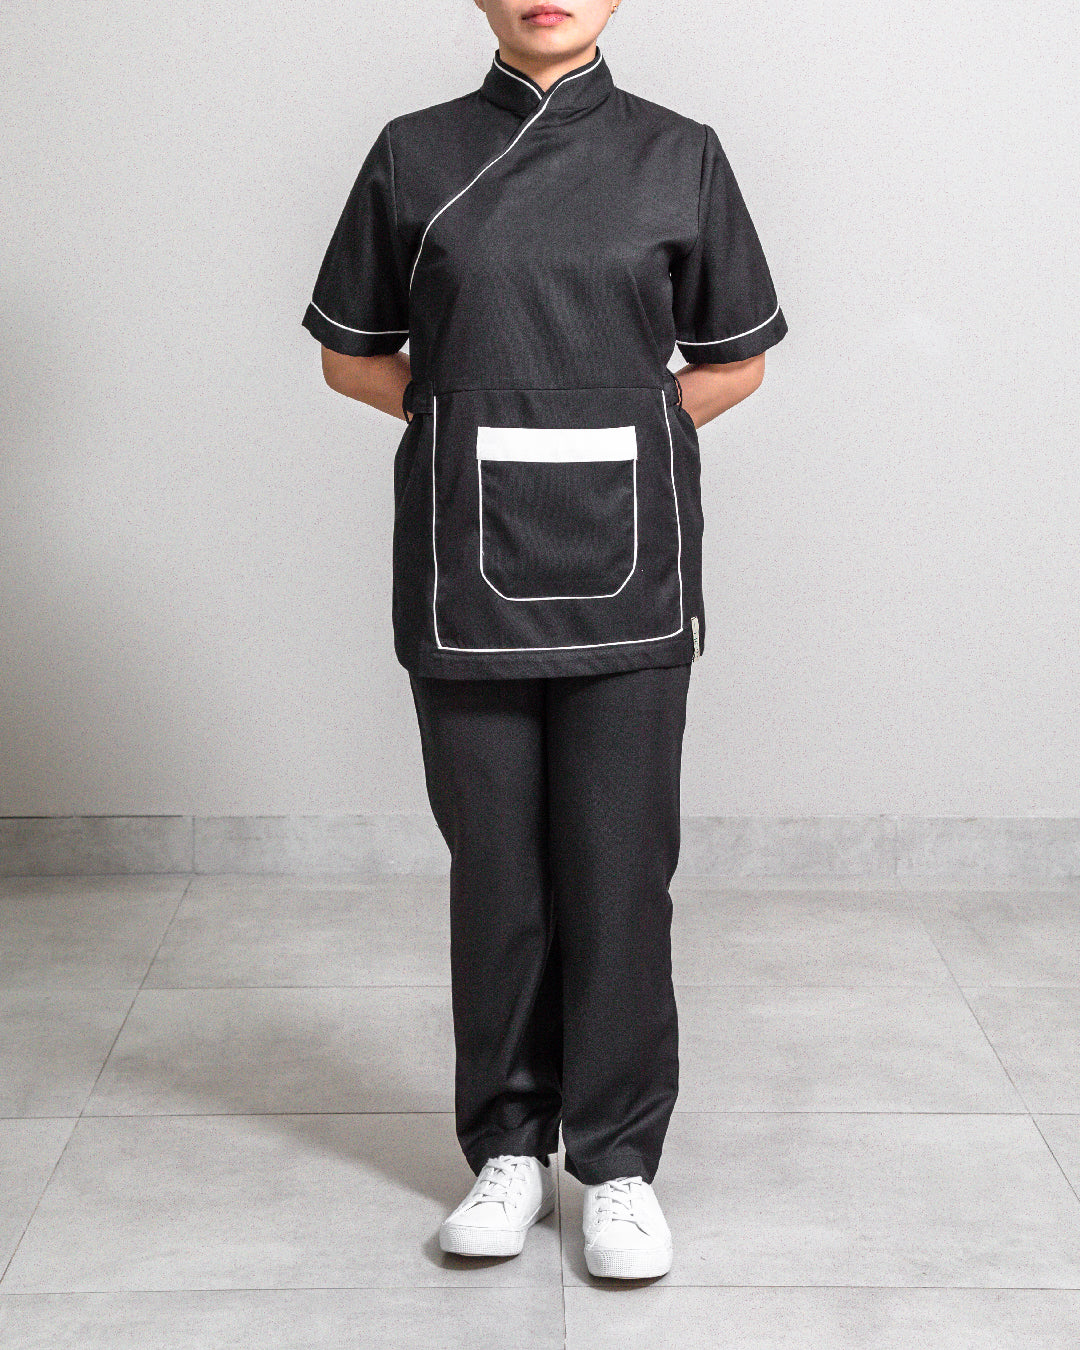 HOP Couture | Tokyo | Black.Offwhite